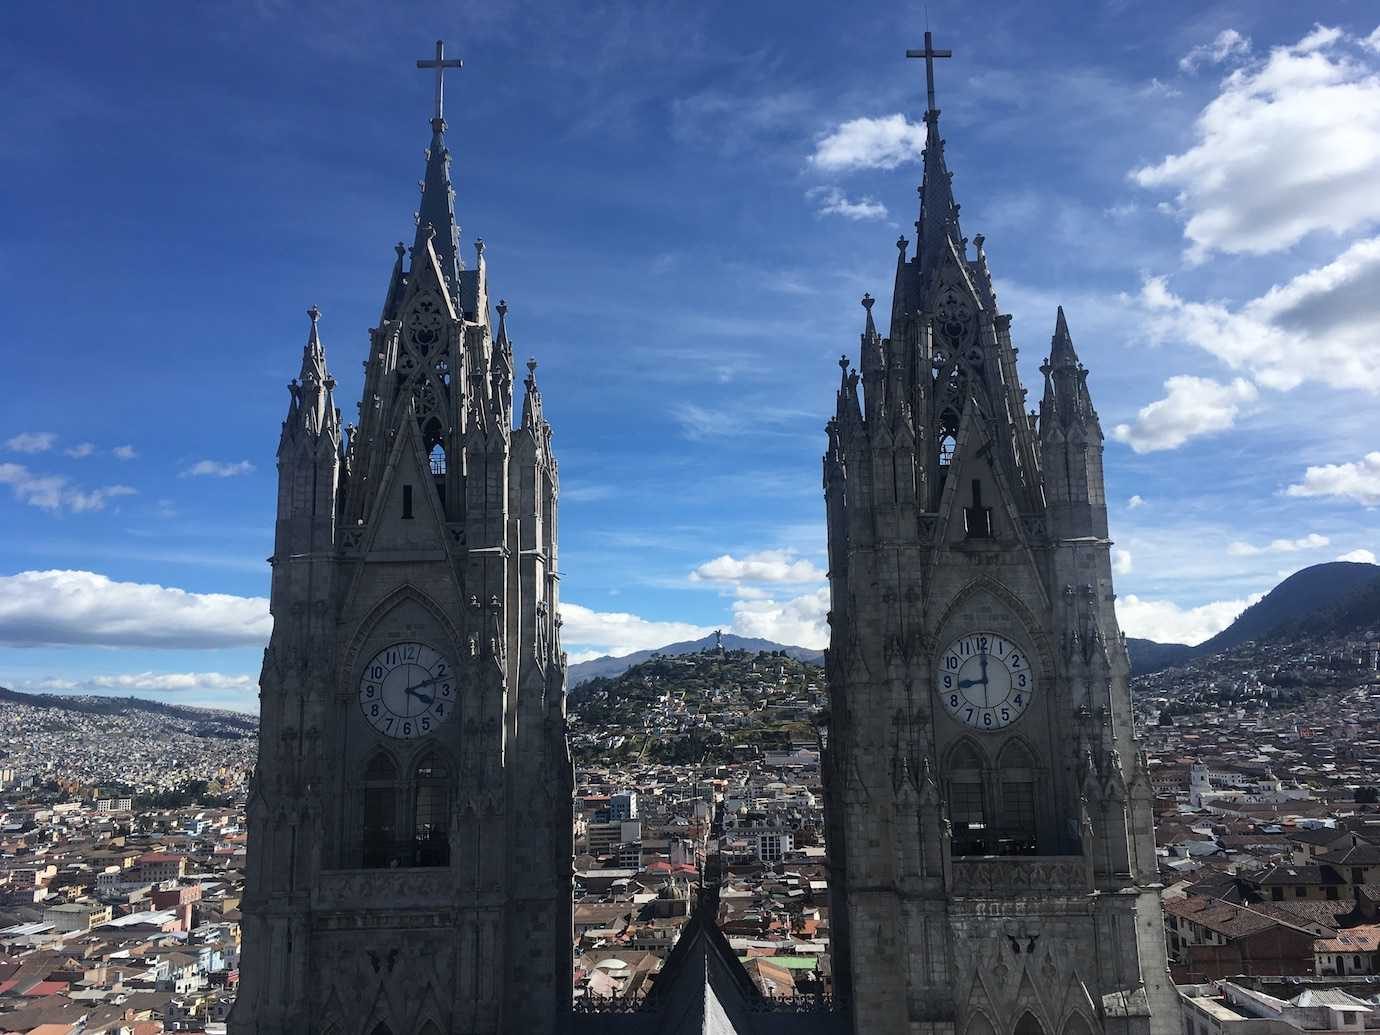 Two Days in Quito